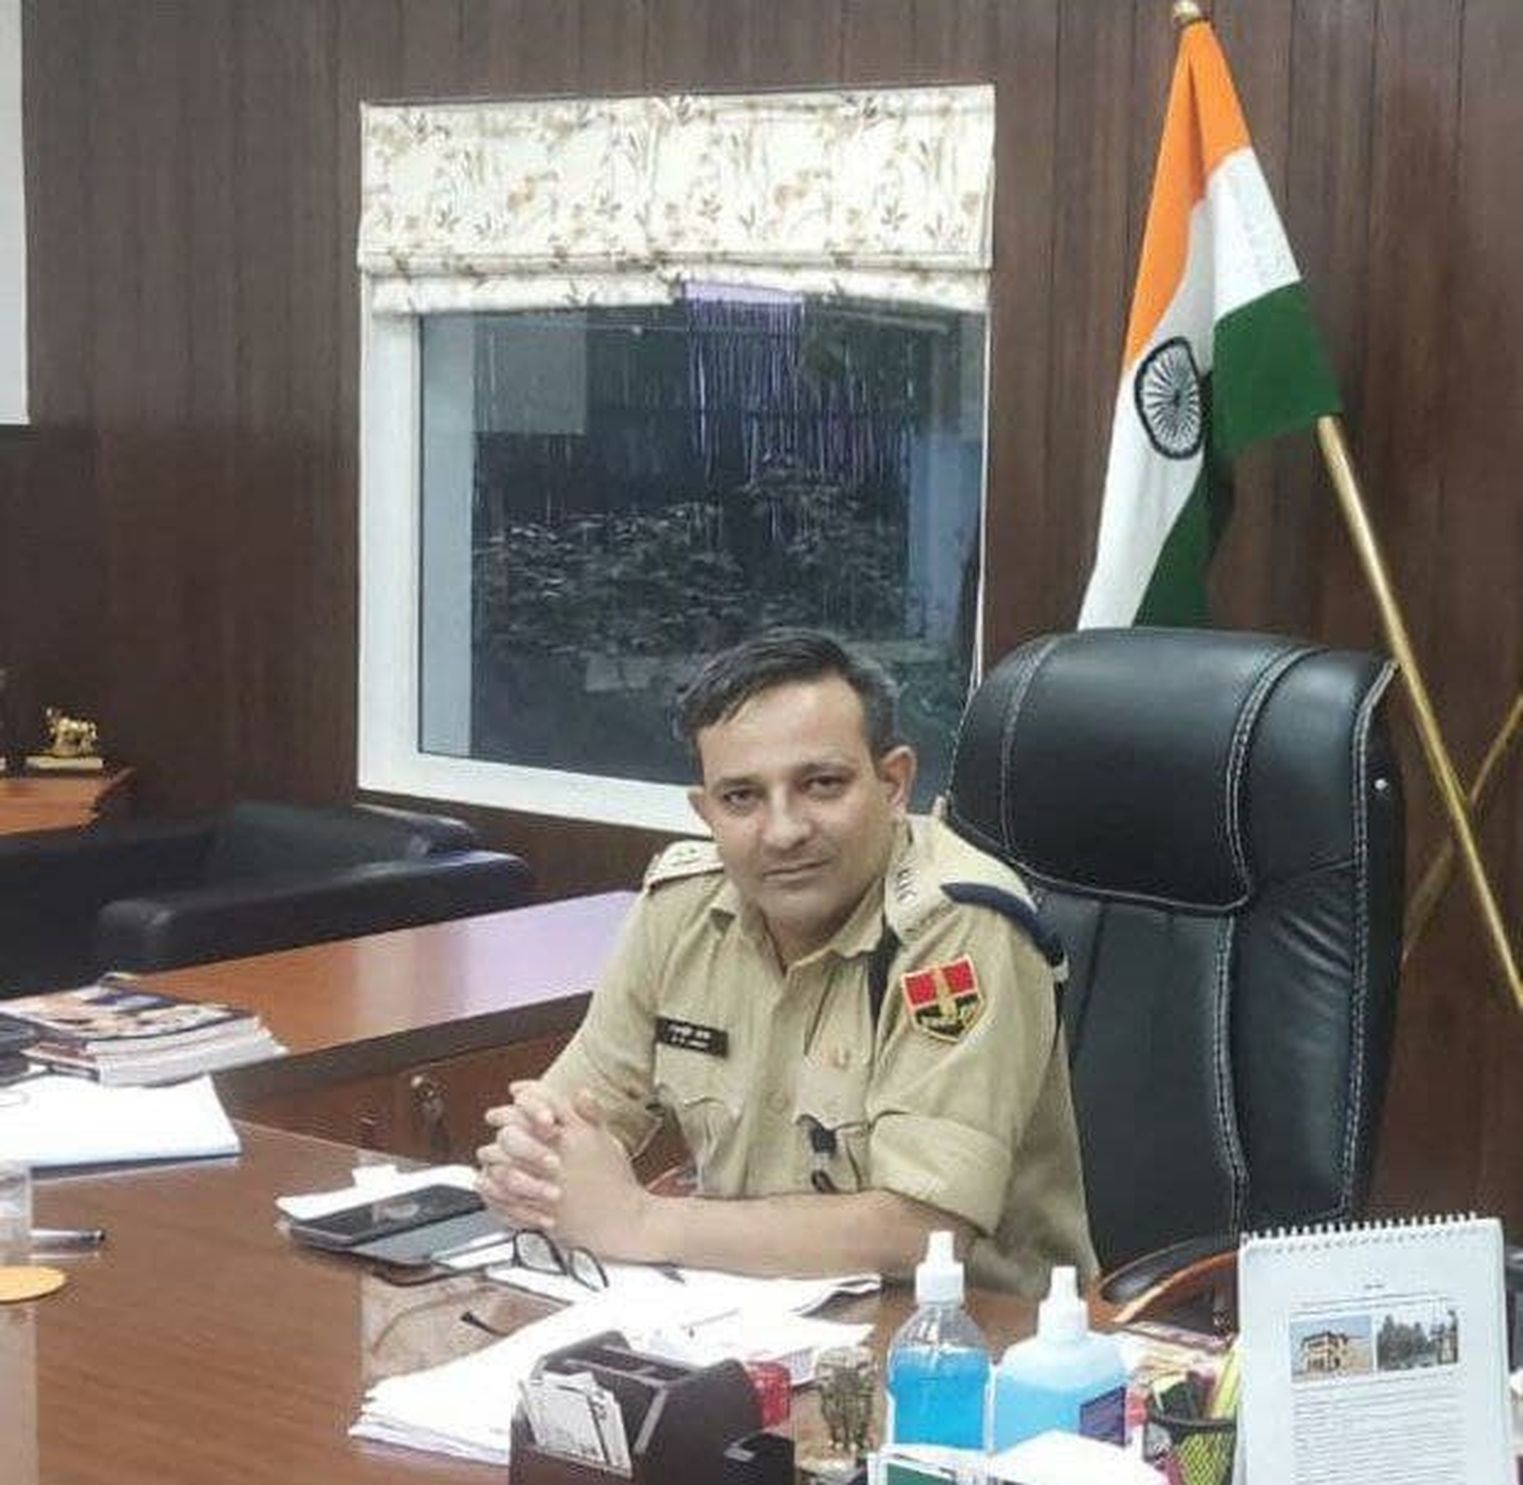 SP transferred in seven months, now Ramamurthy will be SP of Nagaur